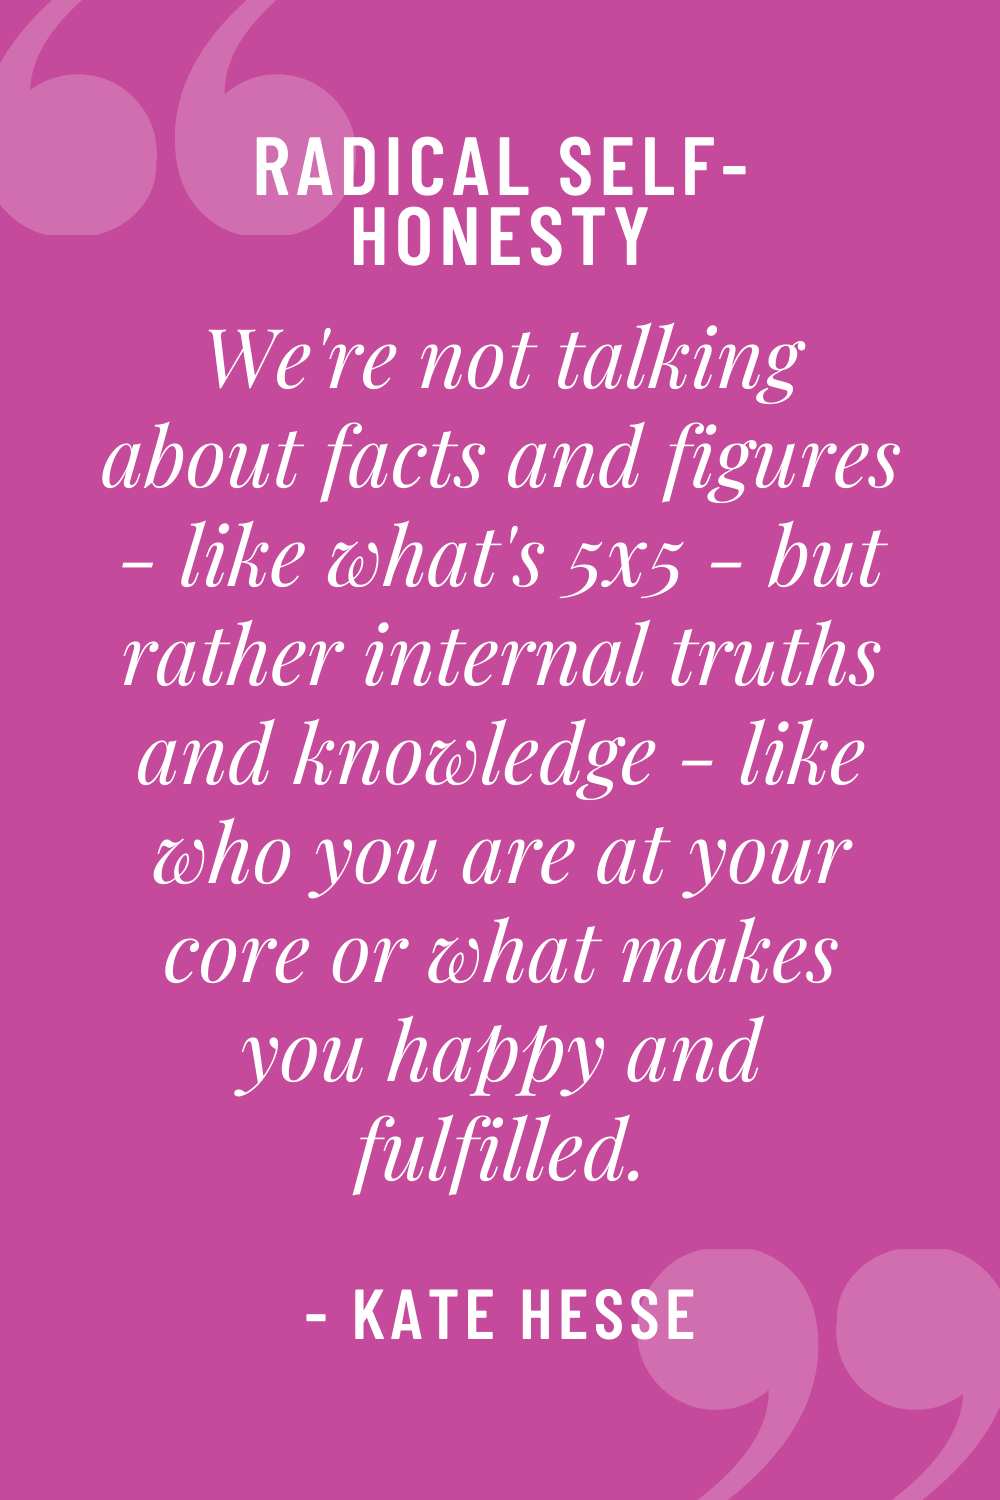 We're not talking about facts and figures - like what's 5x5 - but rather internal truths and knowledge - like who you are at your core, or what makes you happy and fulfilled.